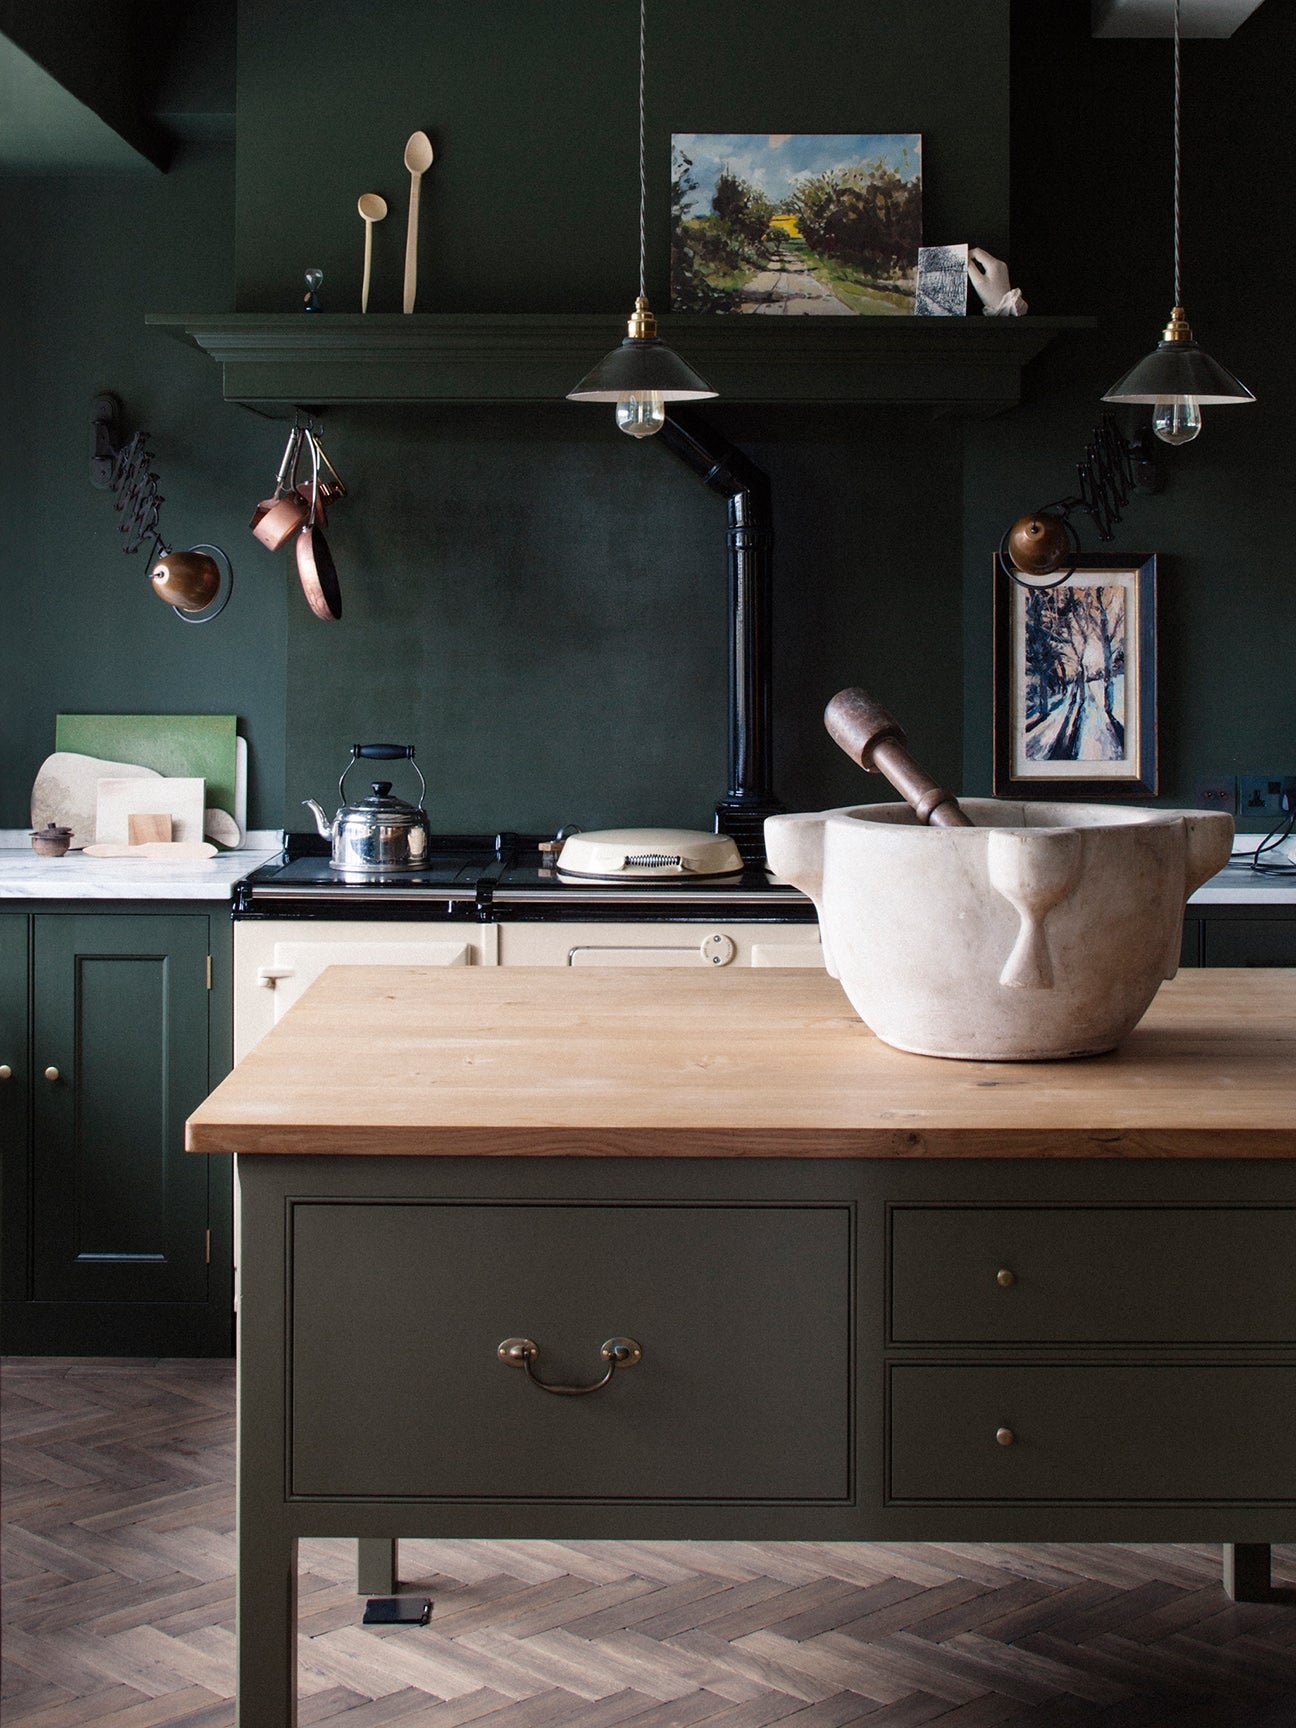 Choosing Green Kitchen Cabinets Is the Bold Decision to Make This Decade